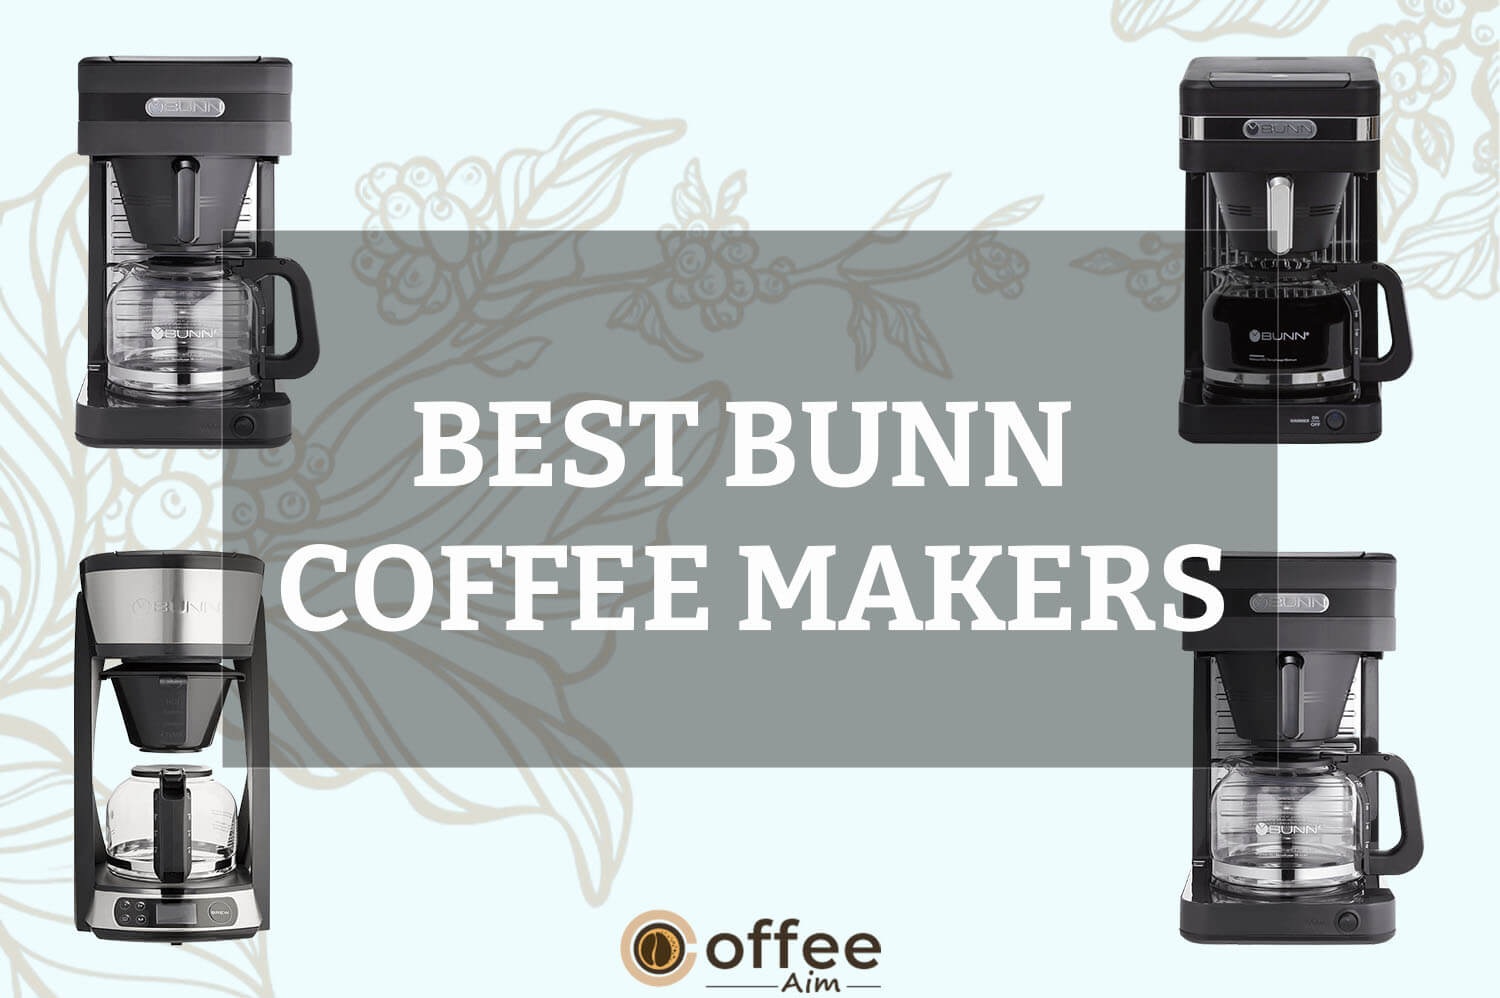 Featured image for the article "Best Bunn Coffee Makers"